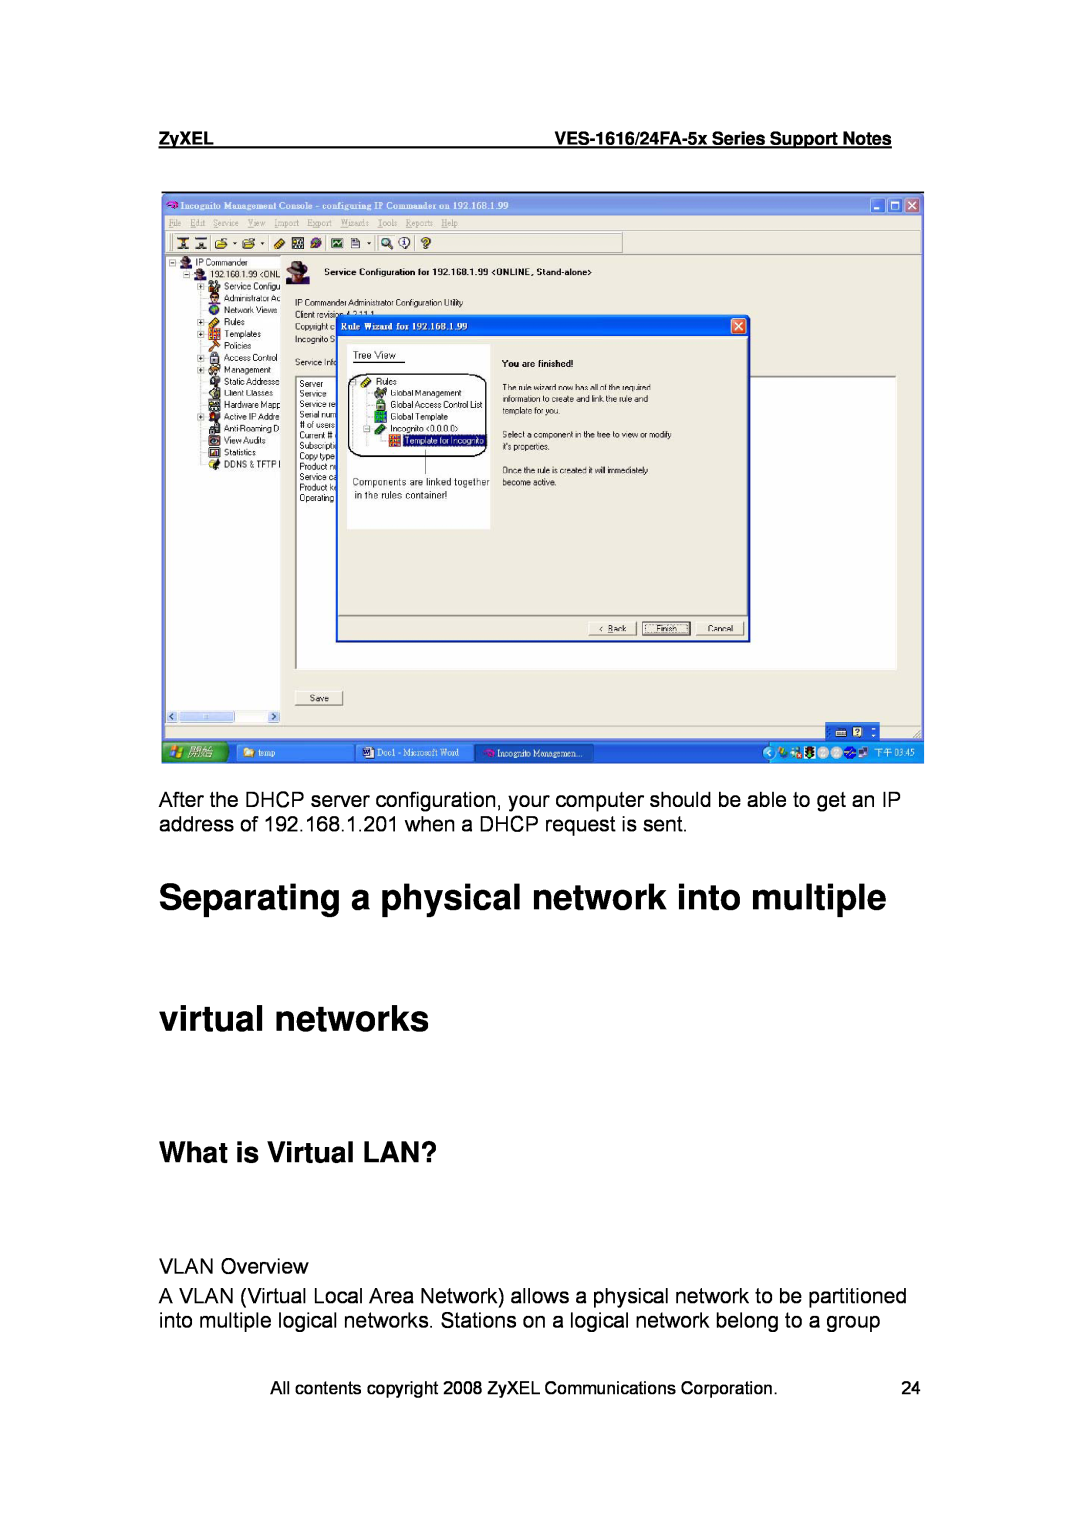 ZyXEL Communications VES-1616 manual Separating a physical network into multiple virtual networks, What is Virtual LAN? 